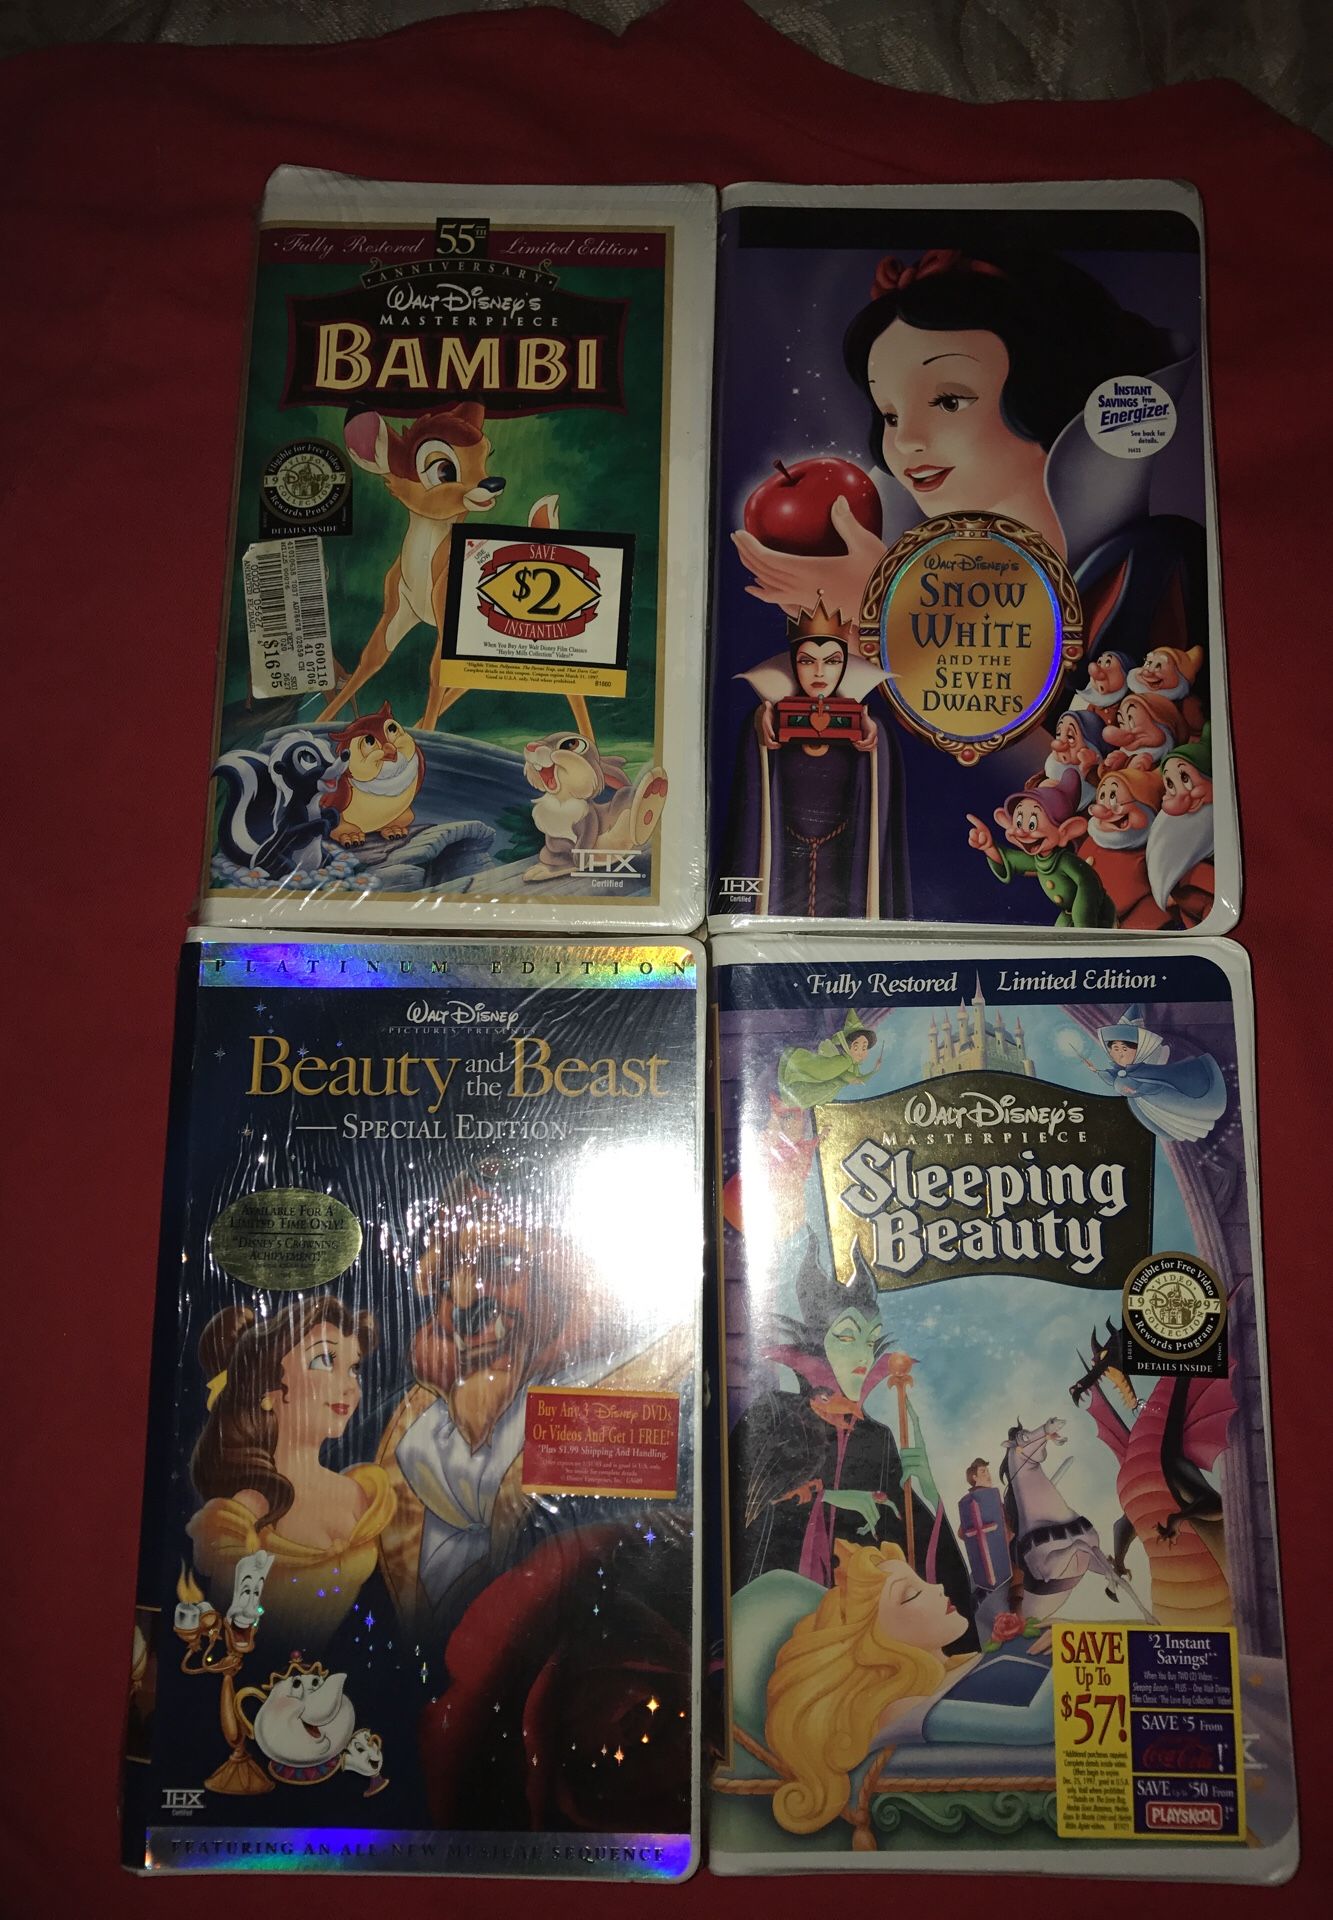 Sealed Disney VHS Tapes, Taking Offers Now!!